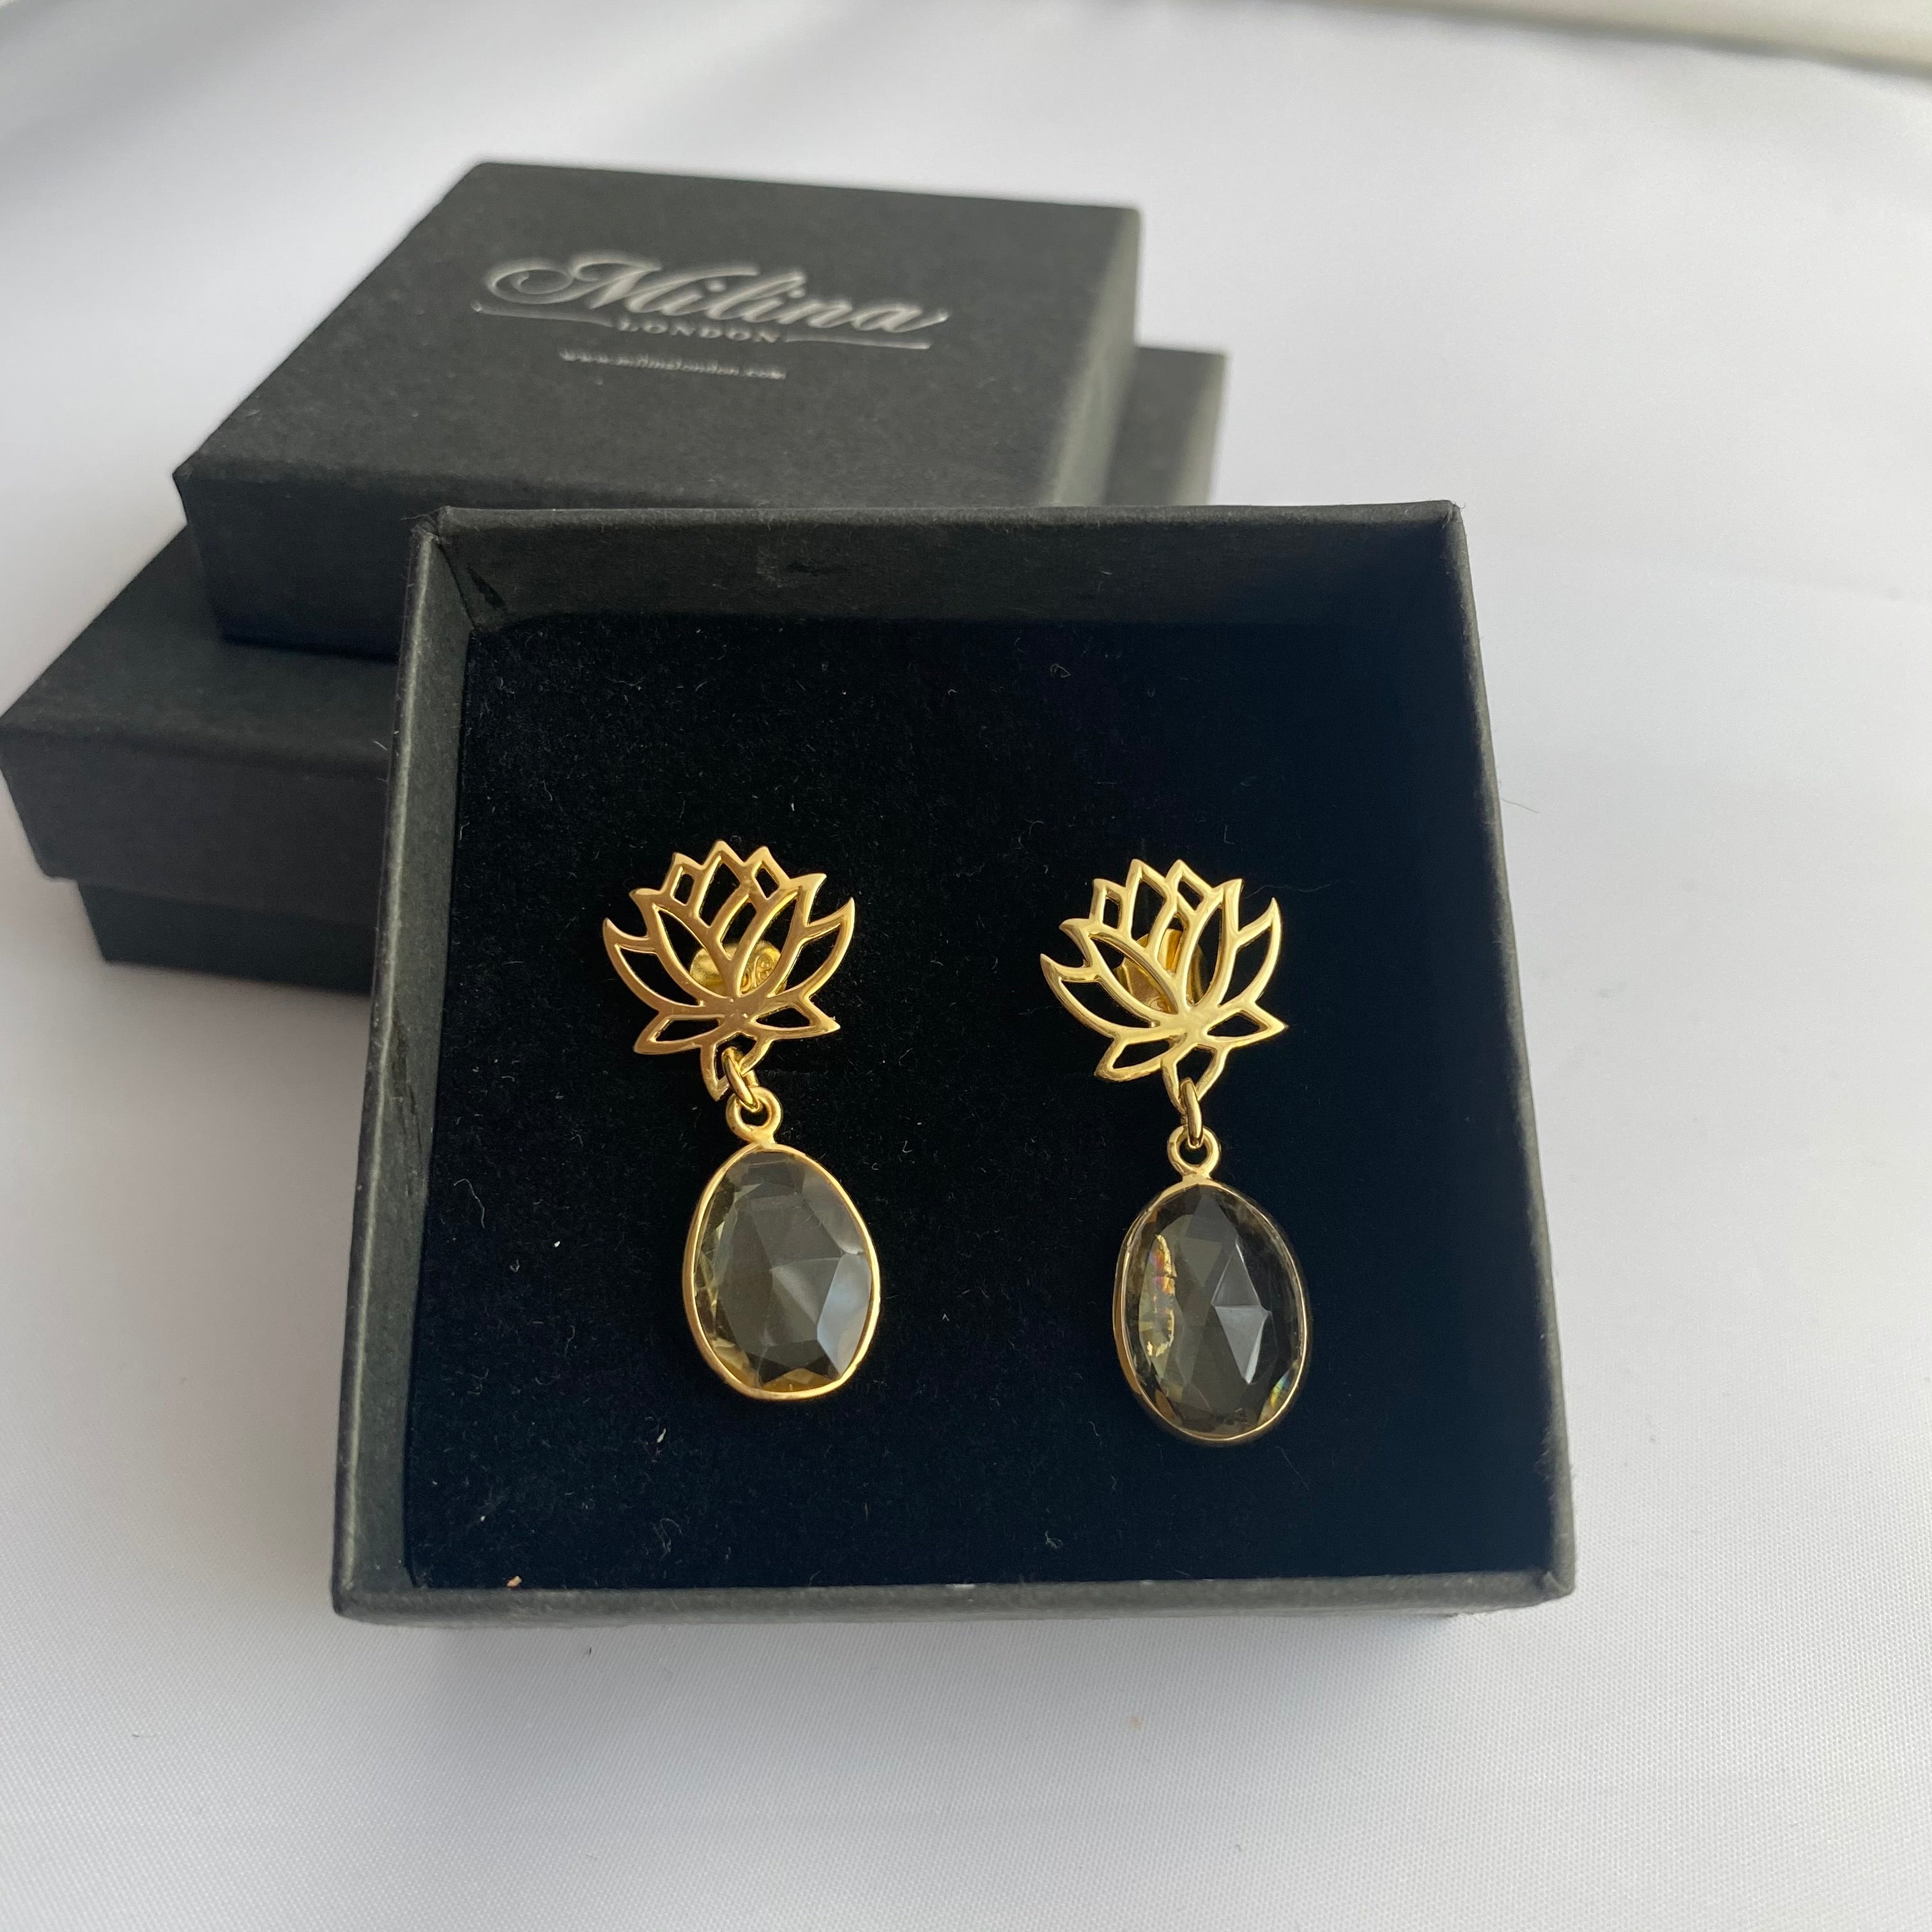 Lotus Earrings in Gold Plated Sterling Silver with a Citrine Gemstone Drop